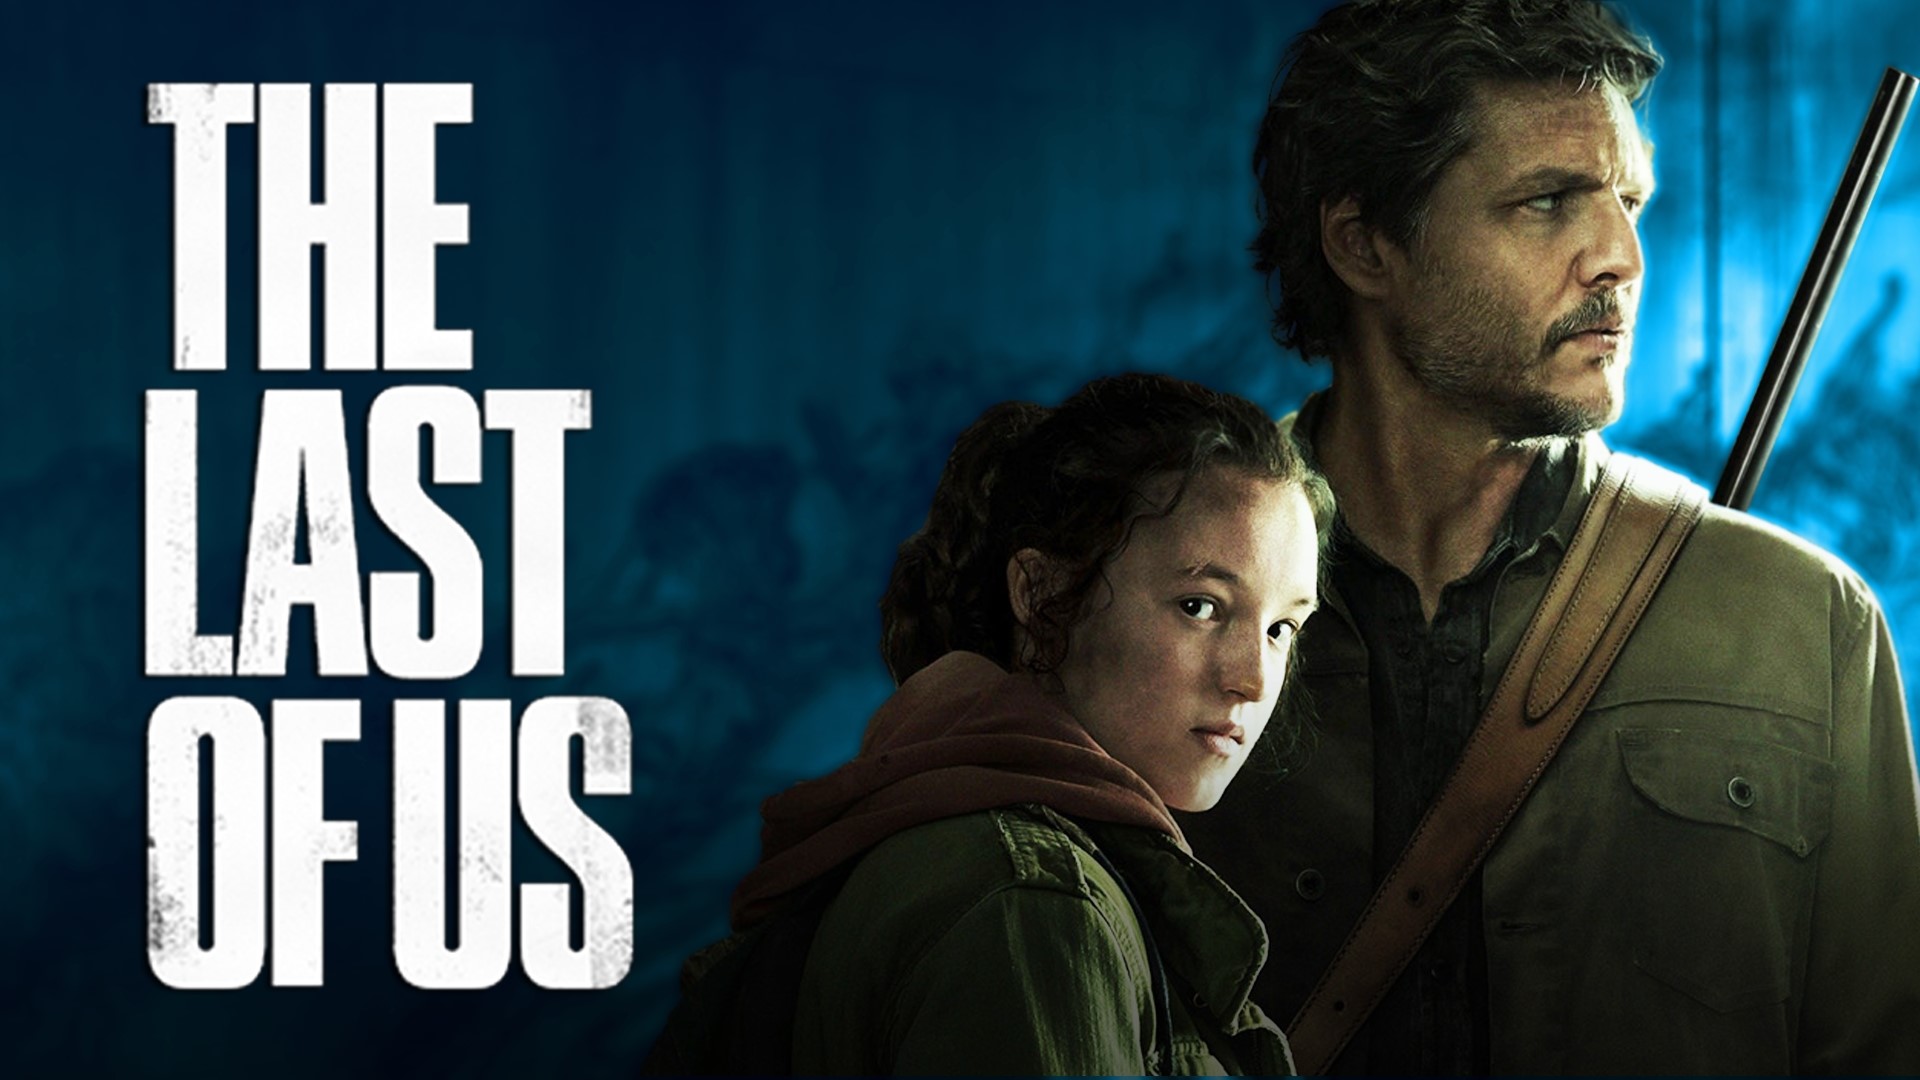 We discussed the choices made in The Last of Us and why the ending is more impactful than it was in the game.